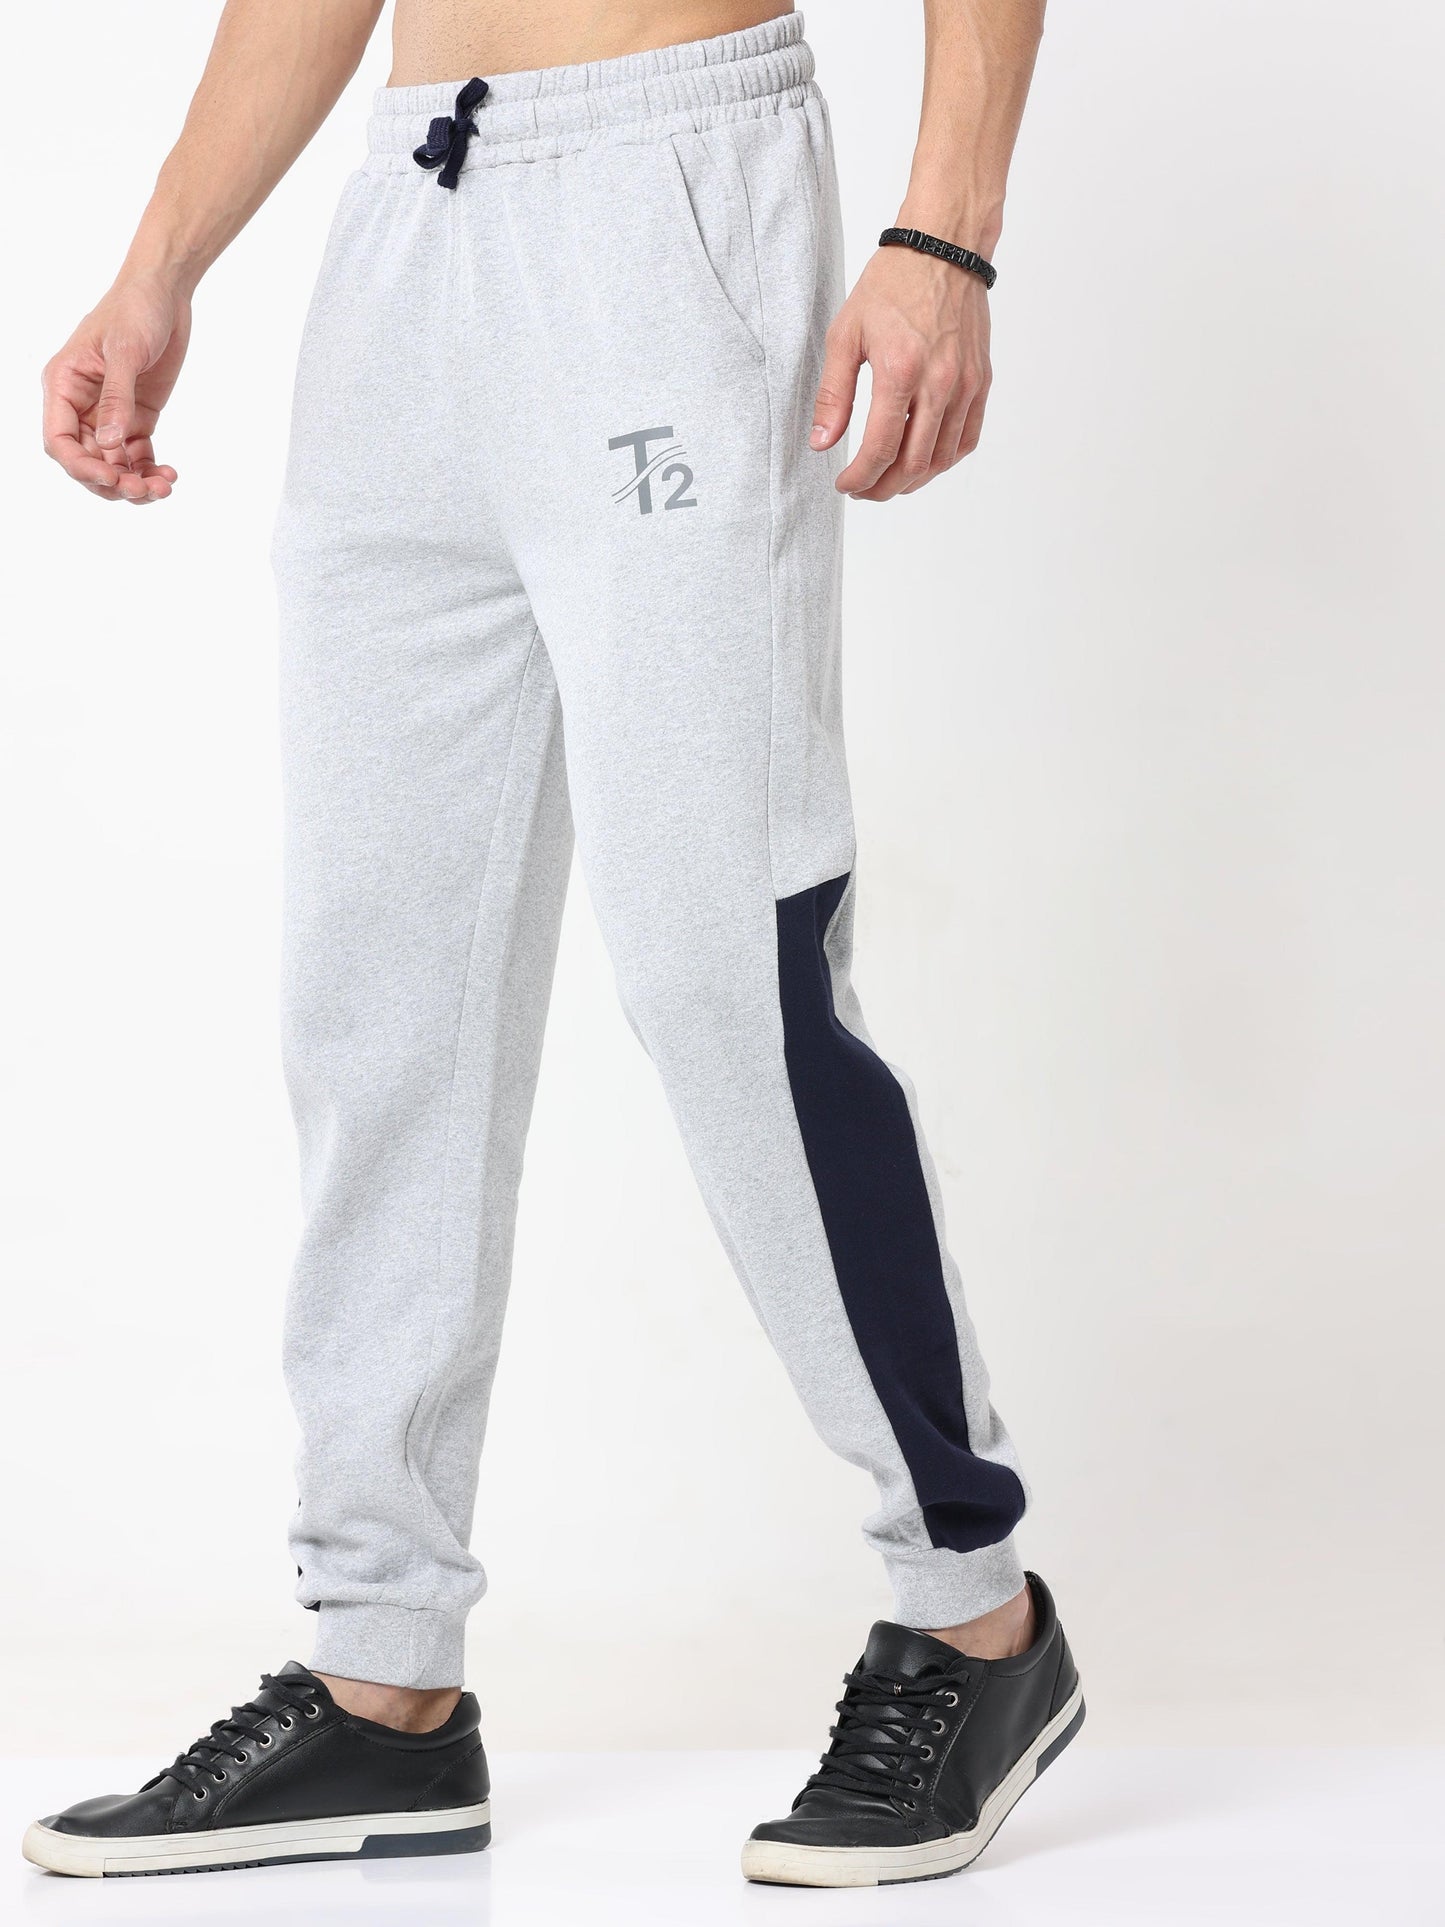 All Day Comfy Men's Cotton Joggers